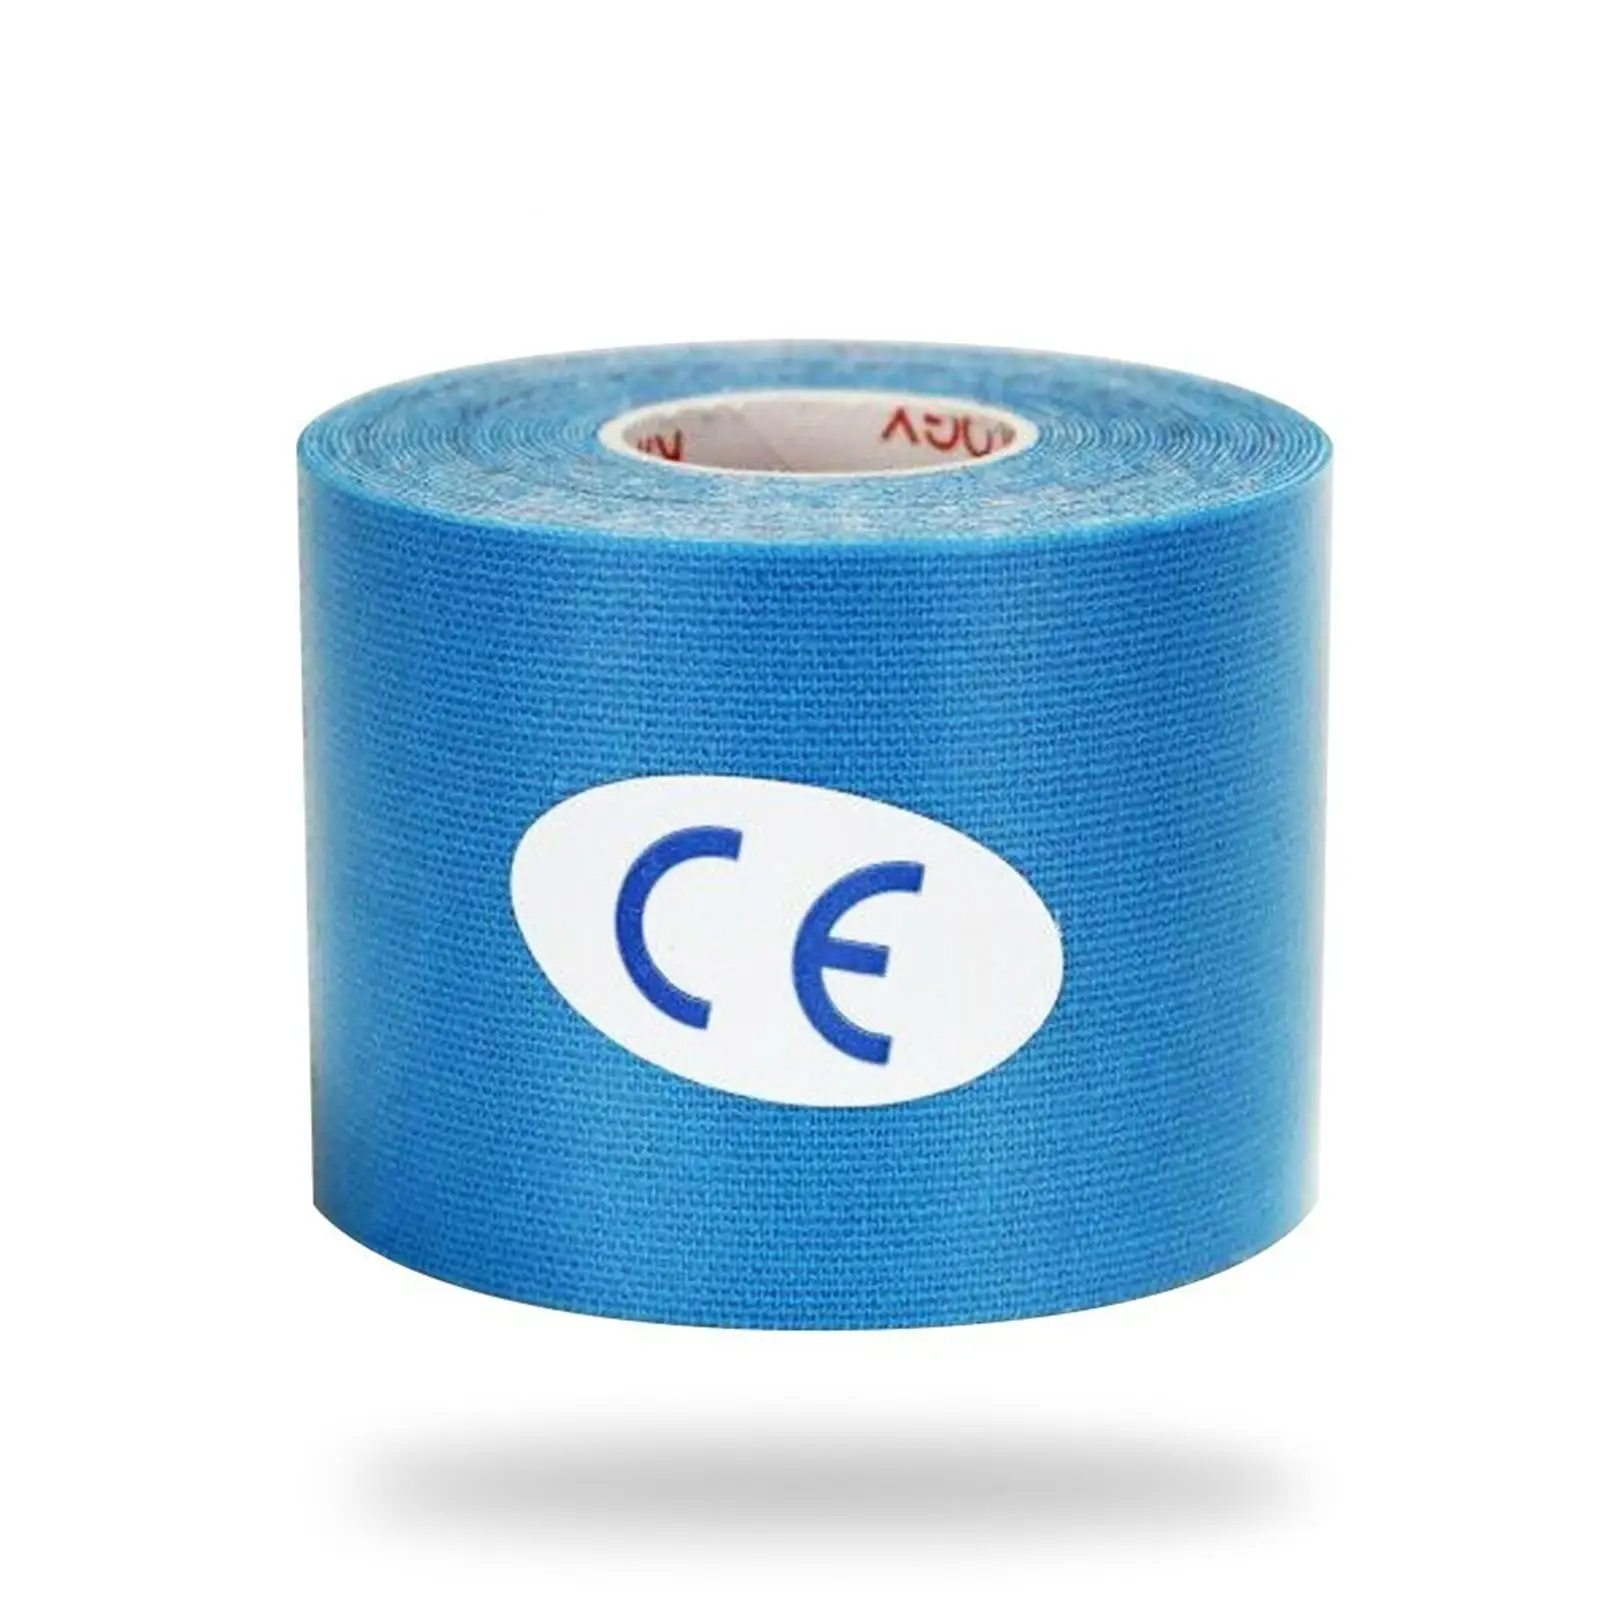 Sports Wrap Tape Wrap Waterproof Muscle Tape Breathable 5cmx5M Athletic Tape Protective Tape for Wrists Ankles Body Chest Gym